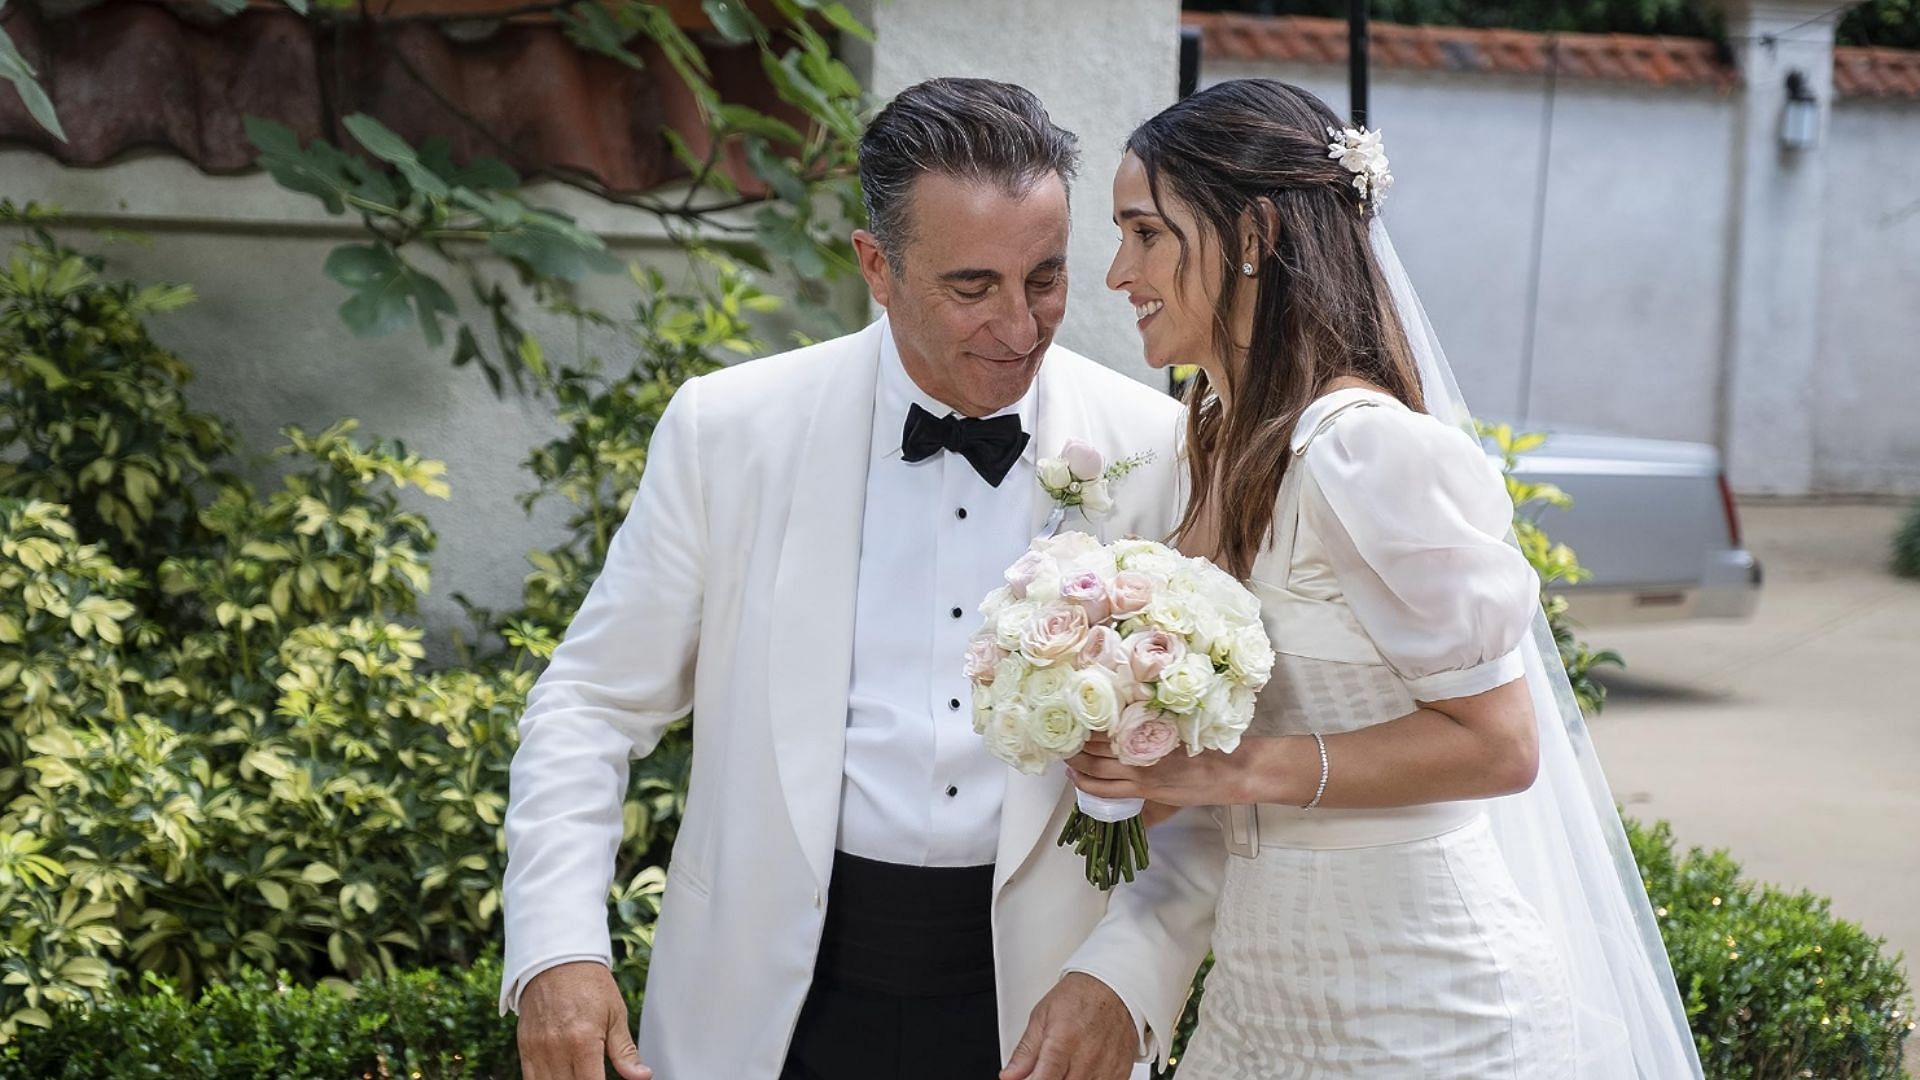 Like Lana in Mother of the Bride, Andy Garc&iacute;a&#039;s character also doesn&#039;t see eye-to-eye with his daughter about the wedding plans (Image via Warner Bros Pictures)